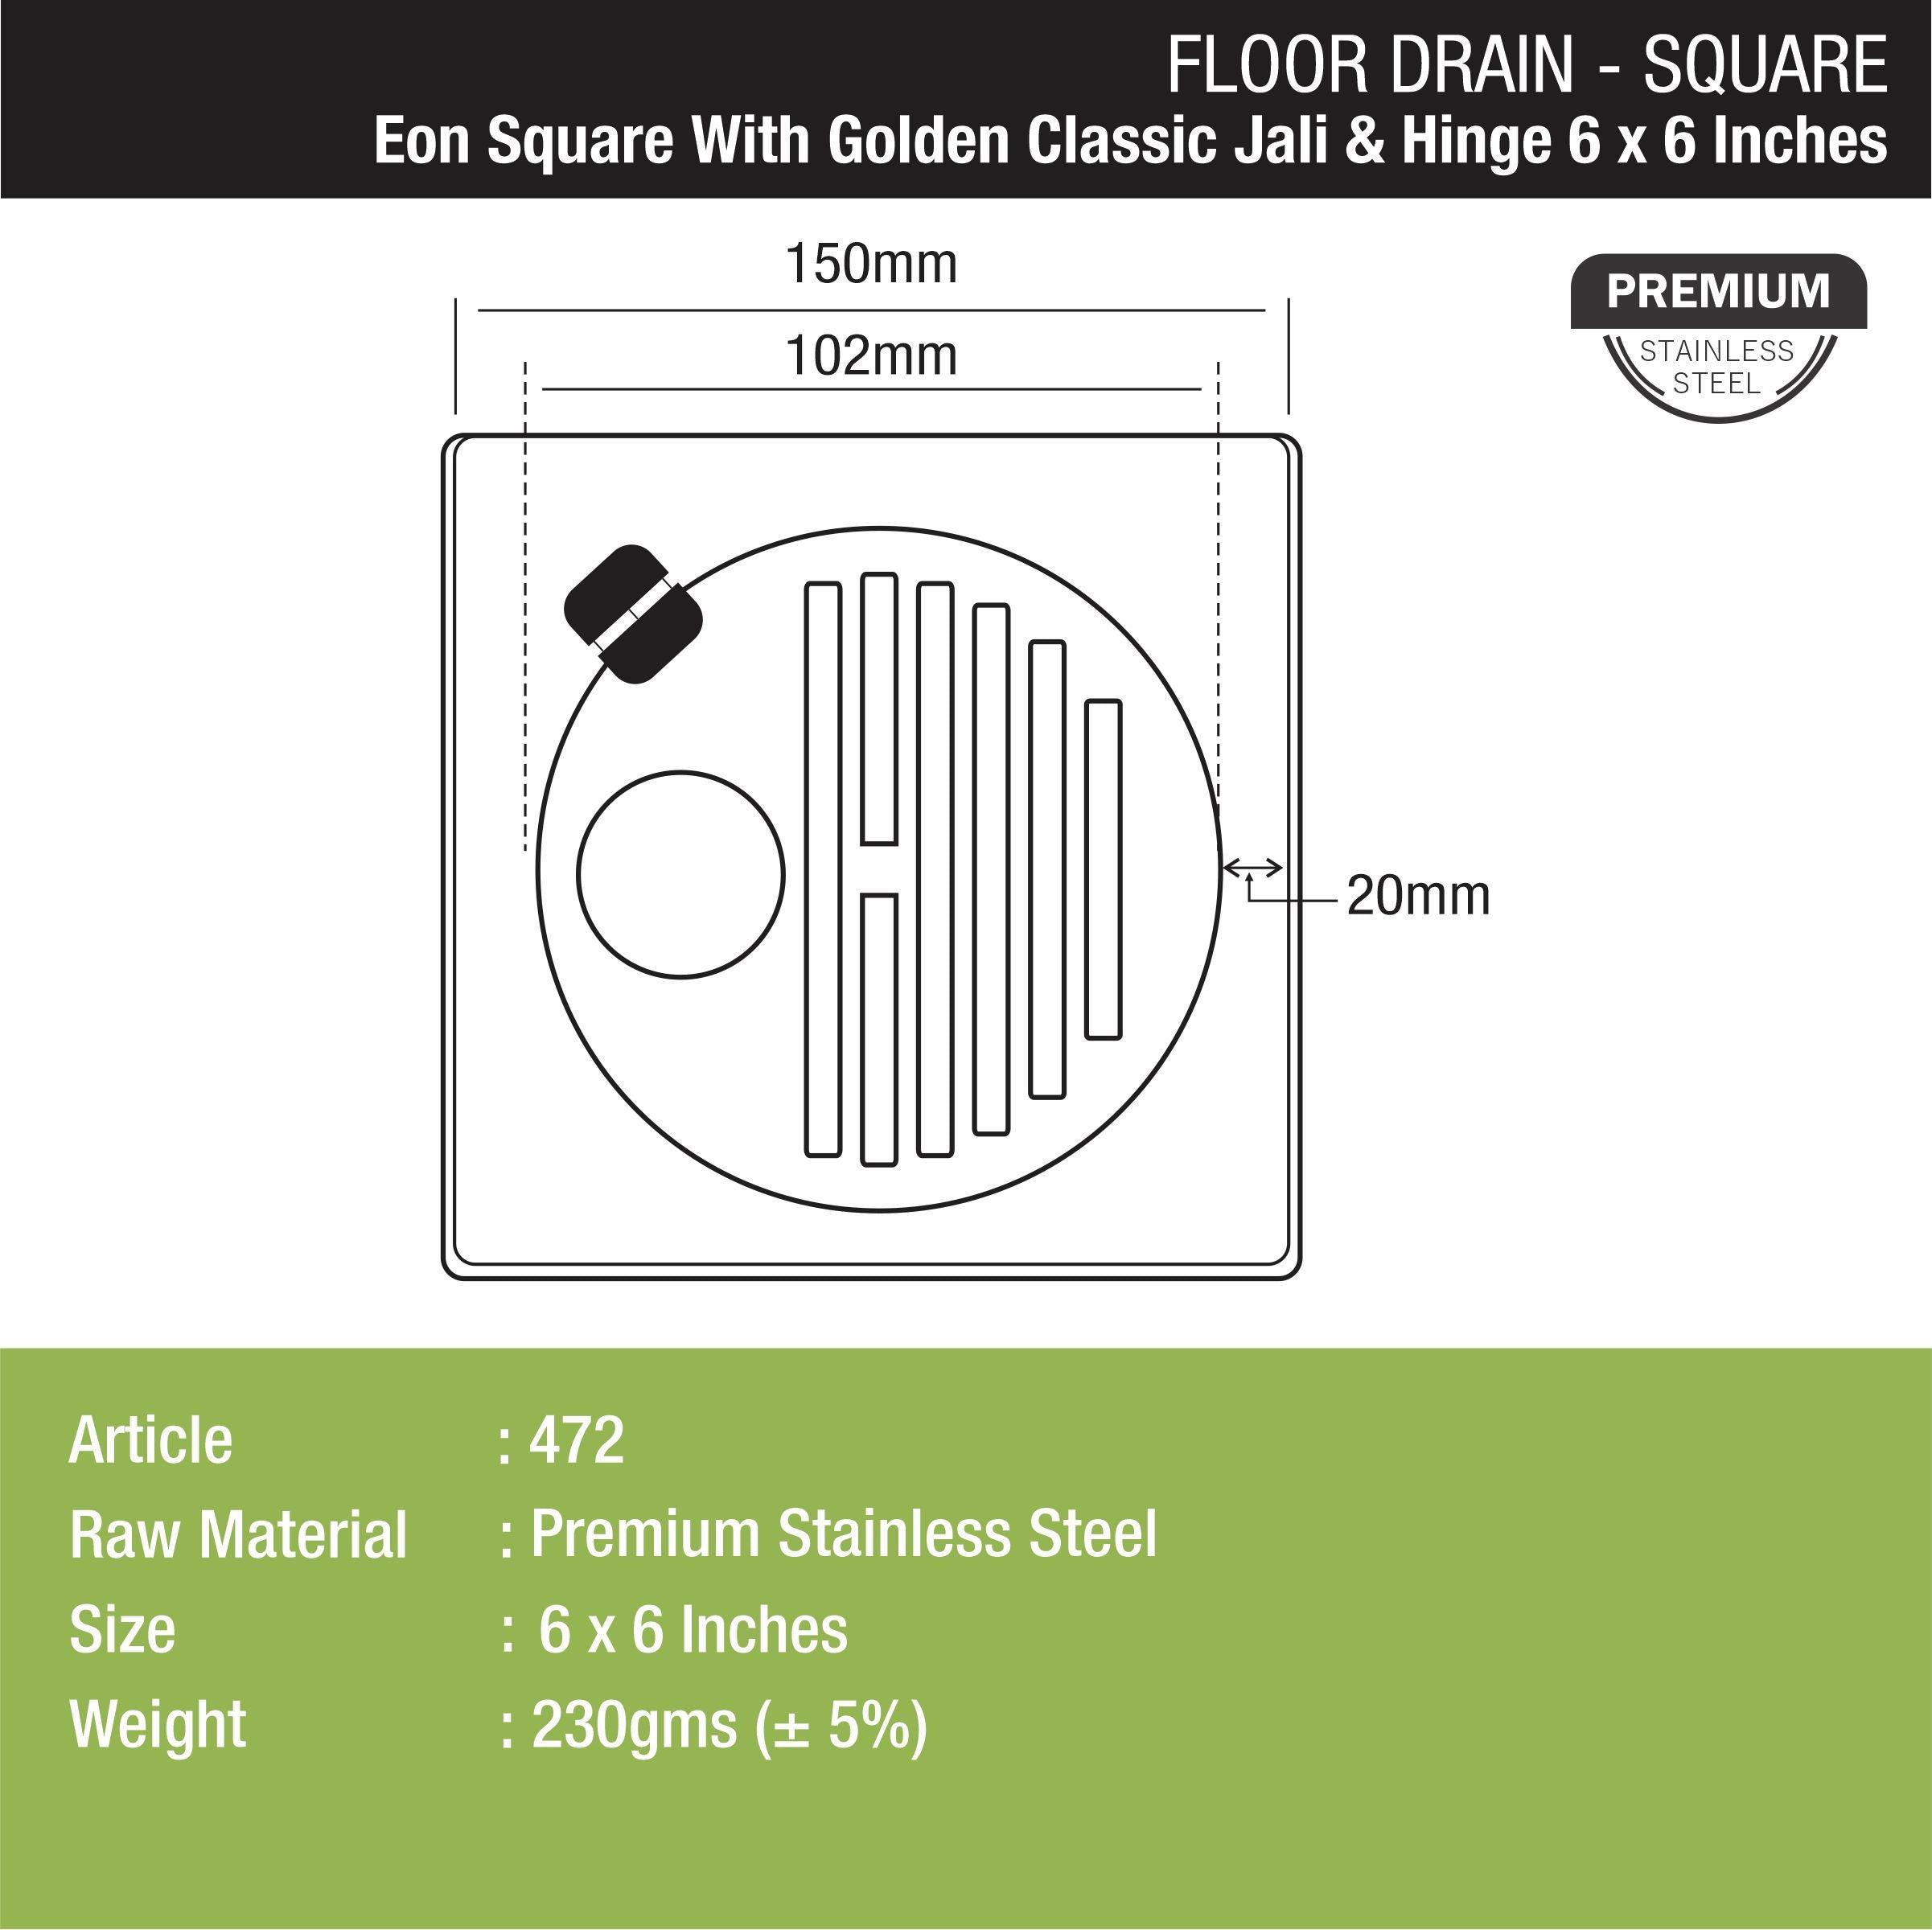 Eon Square Floor Drain with Golden Classic Jali, Hinge and Hole (6 x 6 Inches) - LIPKA - Lipka Home